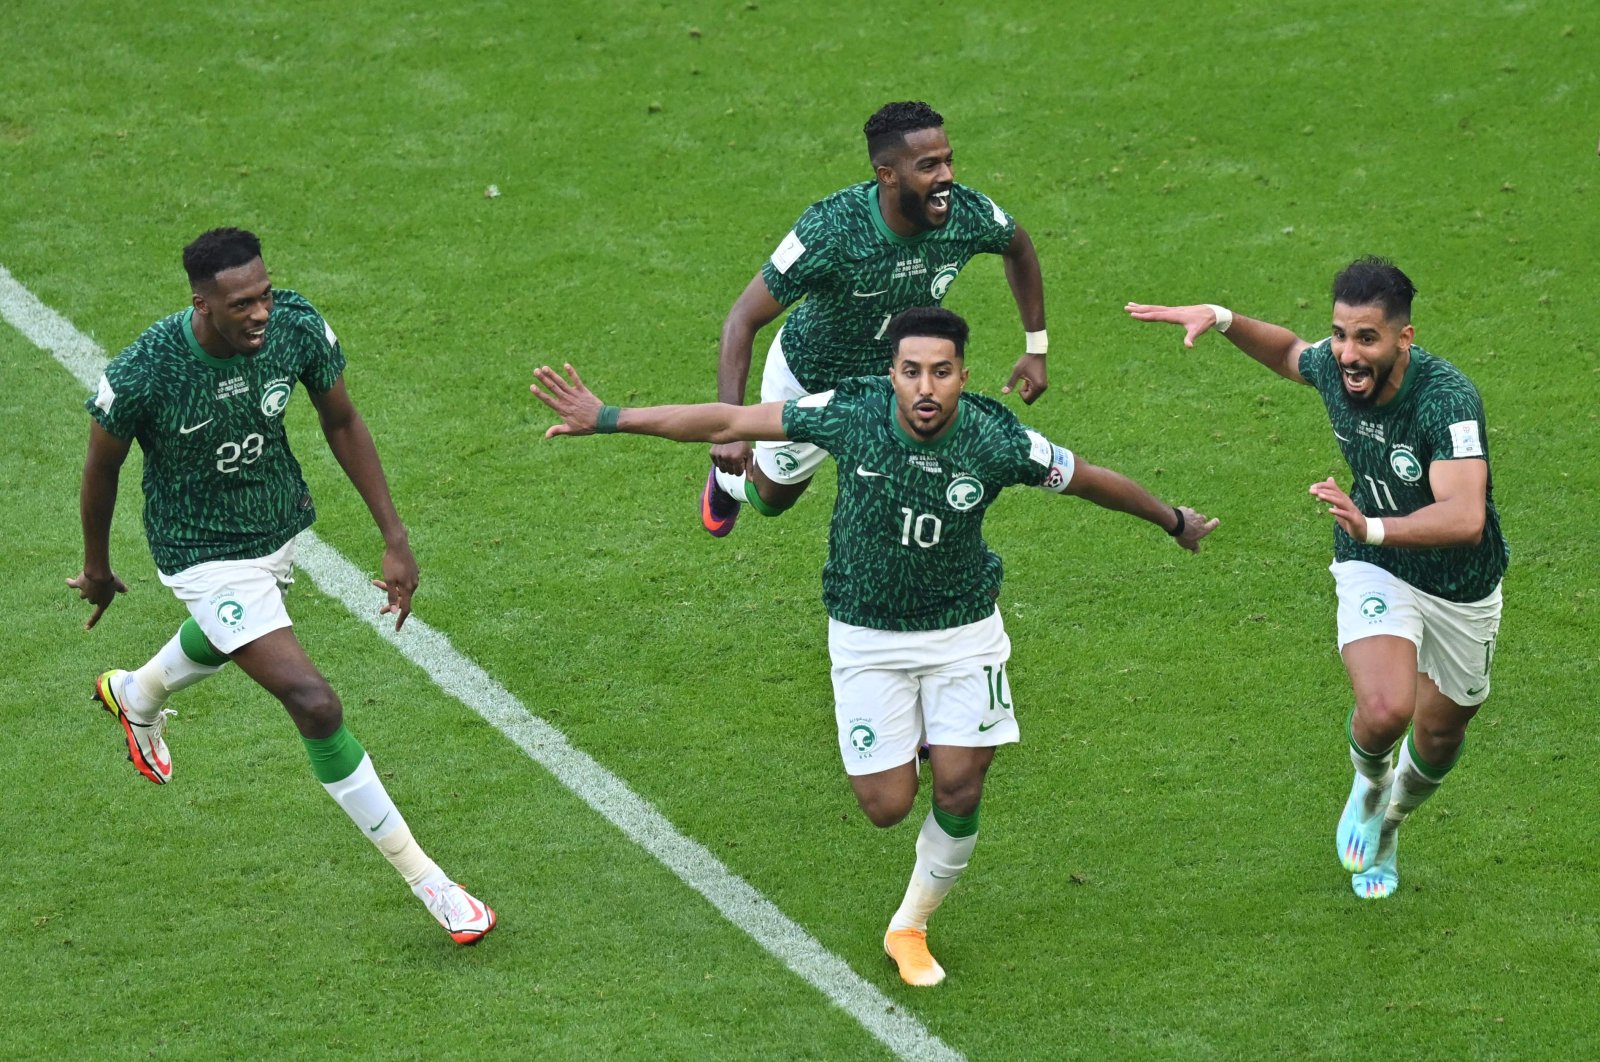 Saudi Arabia&#039;s midfielder Salem al-Dawsari celebrates with his teammates after scoring the second goal during the Qatar 2022 World Cup Group C football match between Argentina and Saudi Arabia at the Lusail Stadium, Lusail, Doha, Nov. 22, 2022. (AFP Photo)